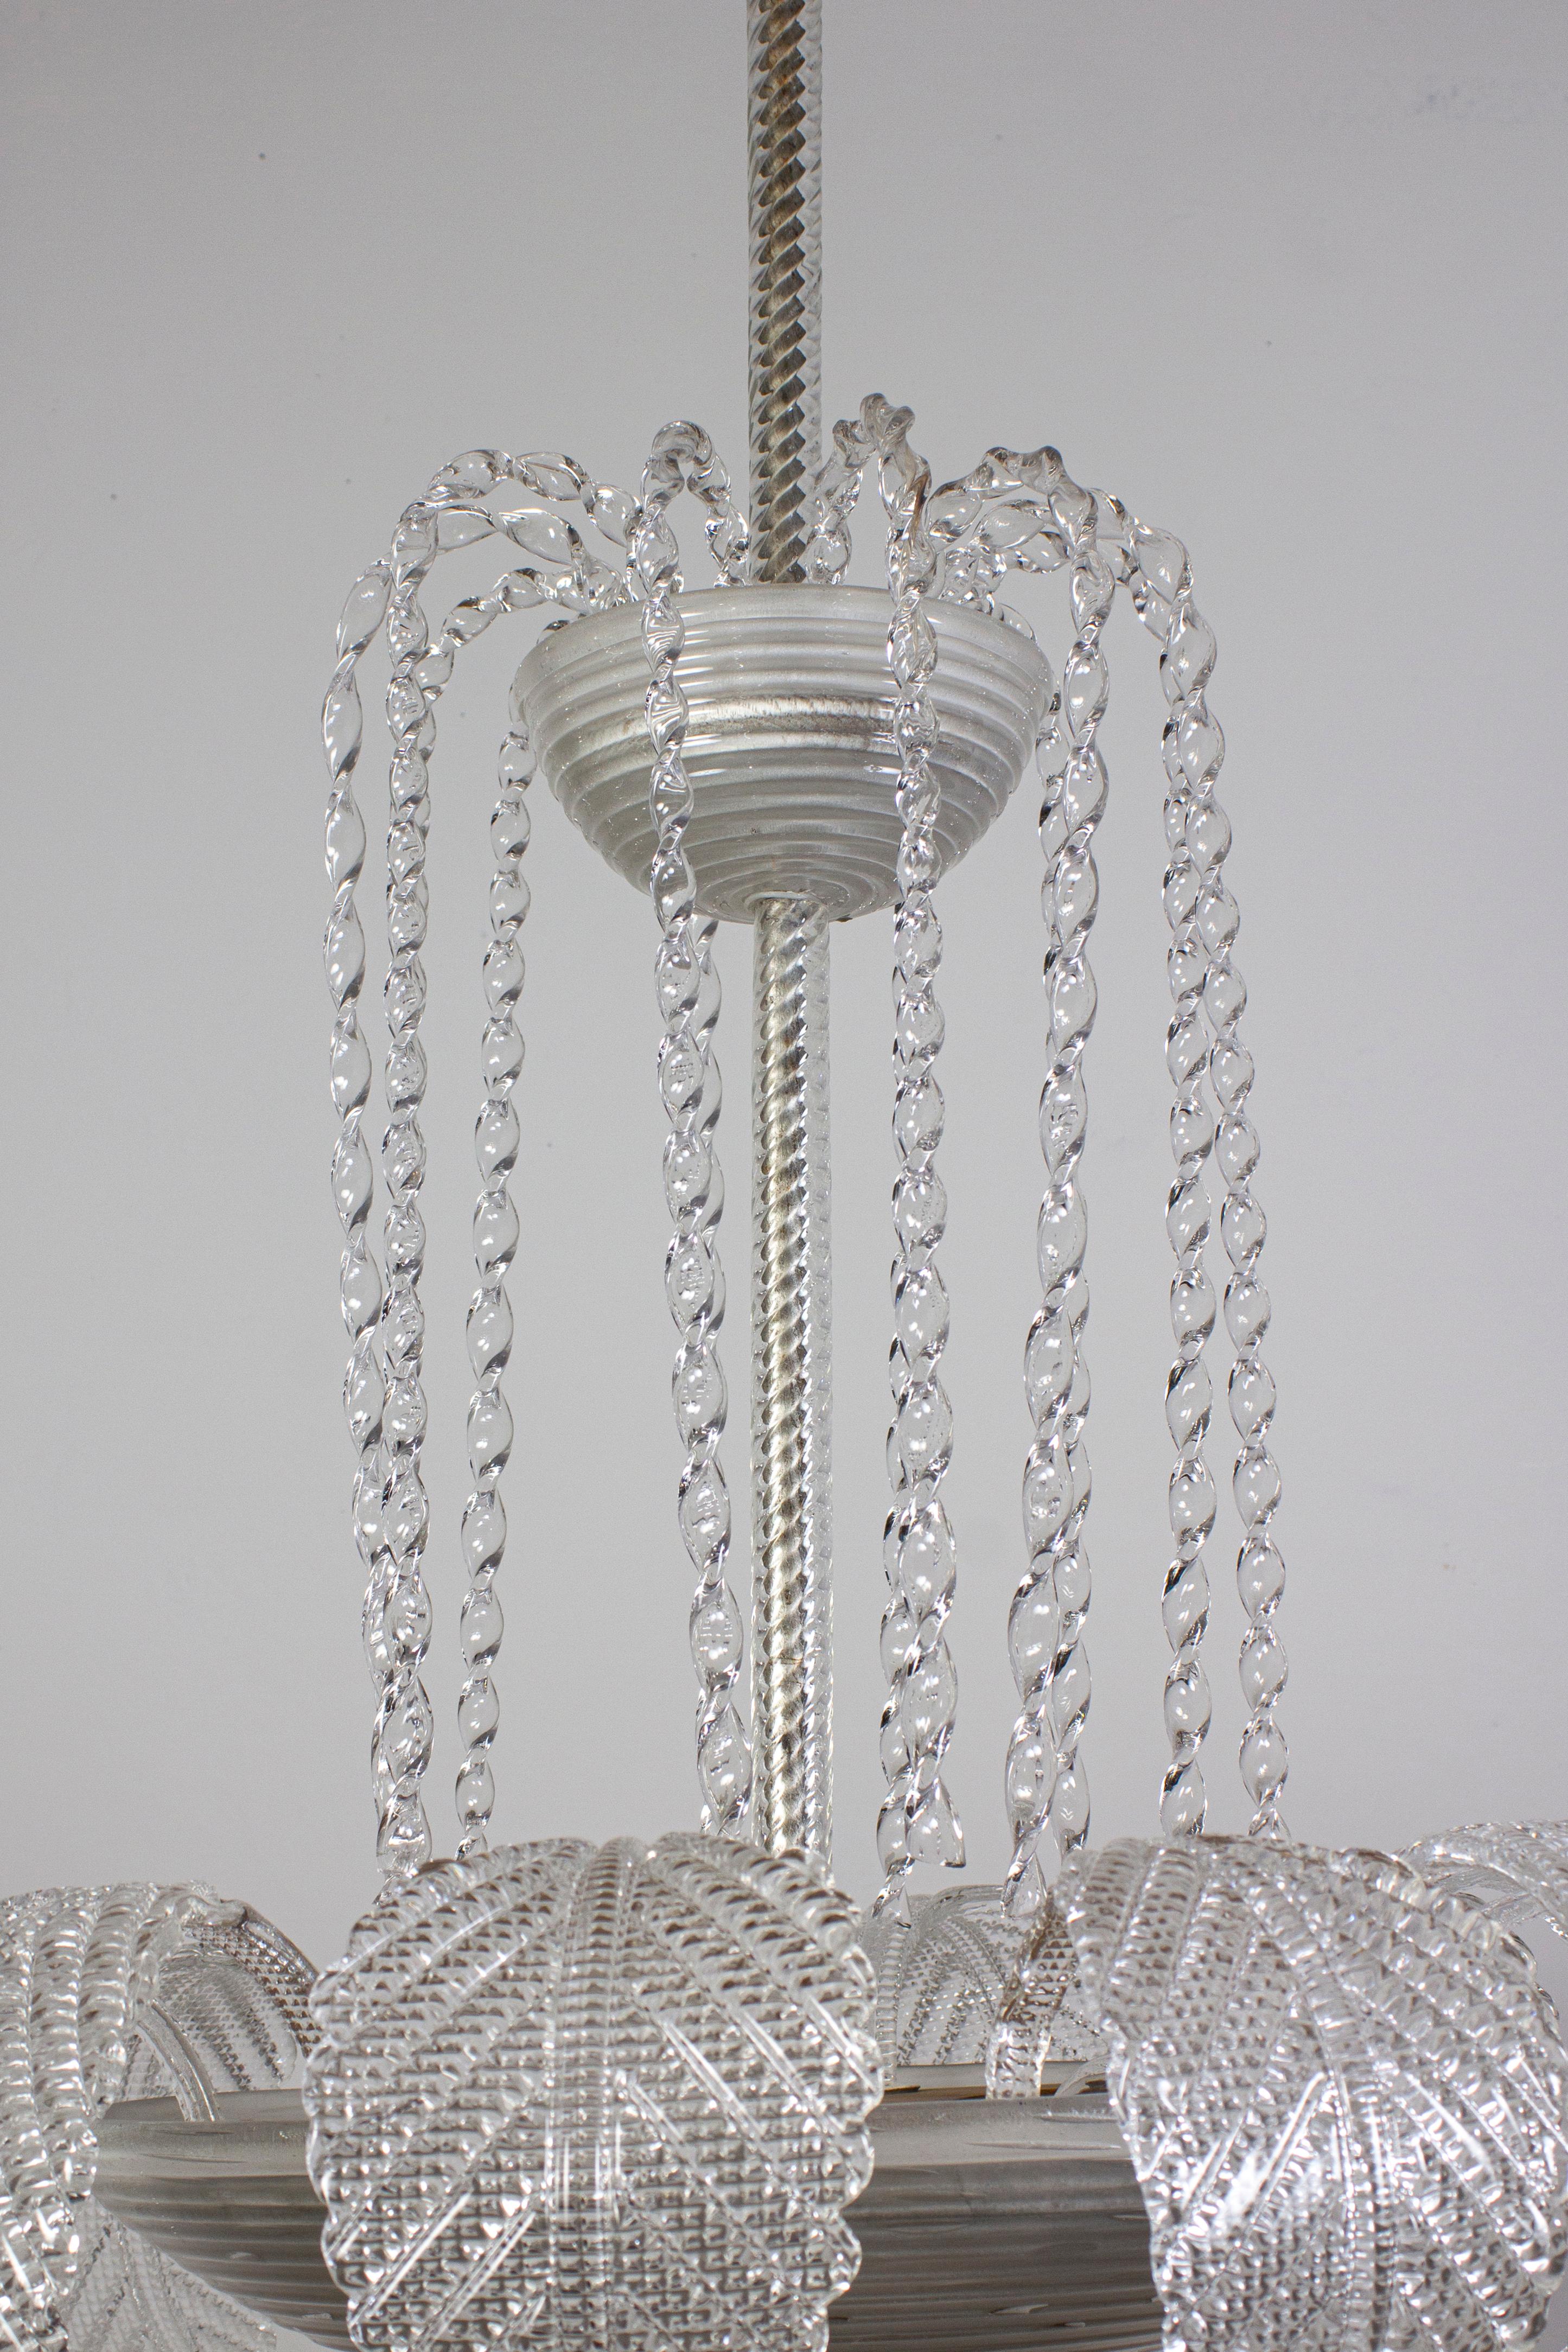 Overwhelming  Art Deco Ninfea Murano Glass Chandelier by Barovier Italy, 1940 For Sale 2